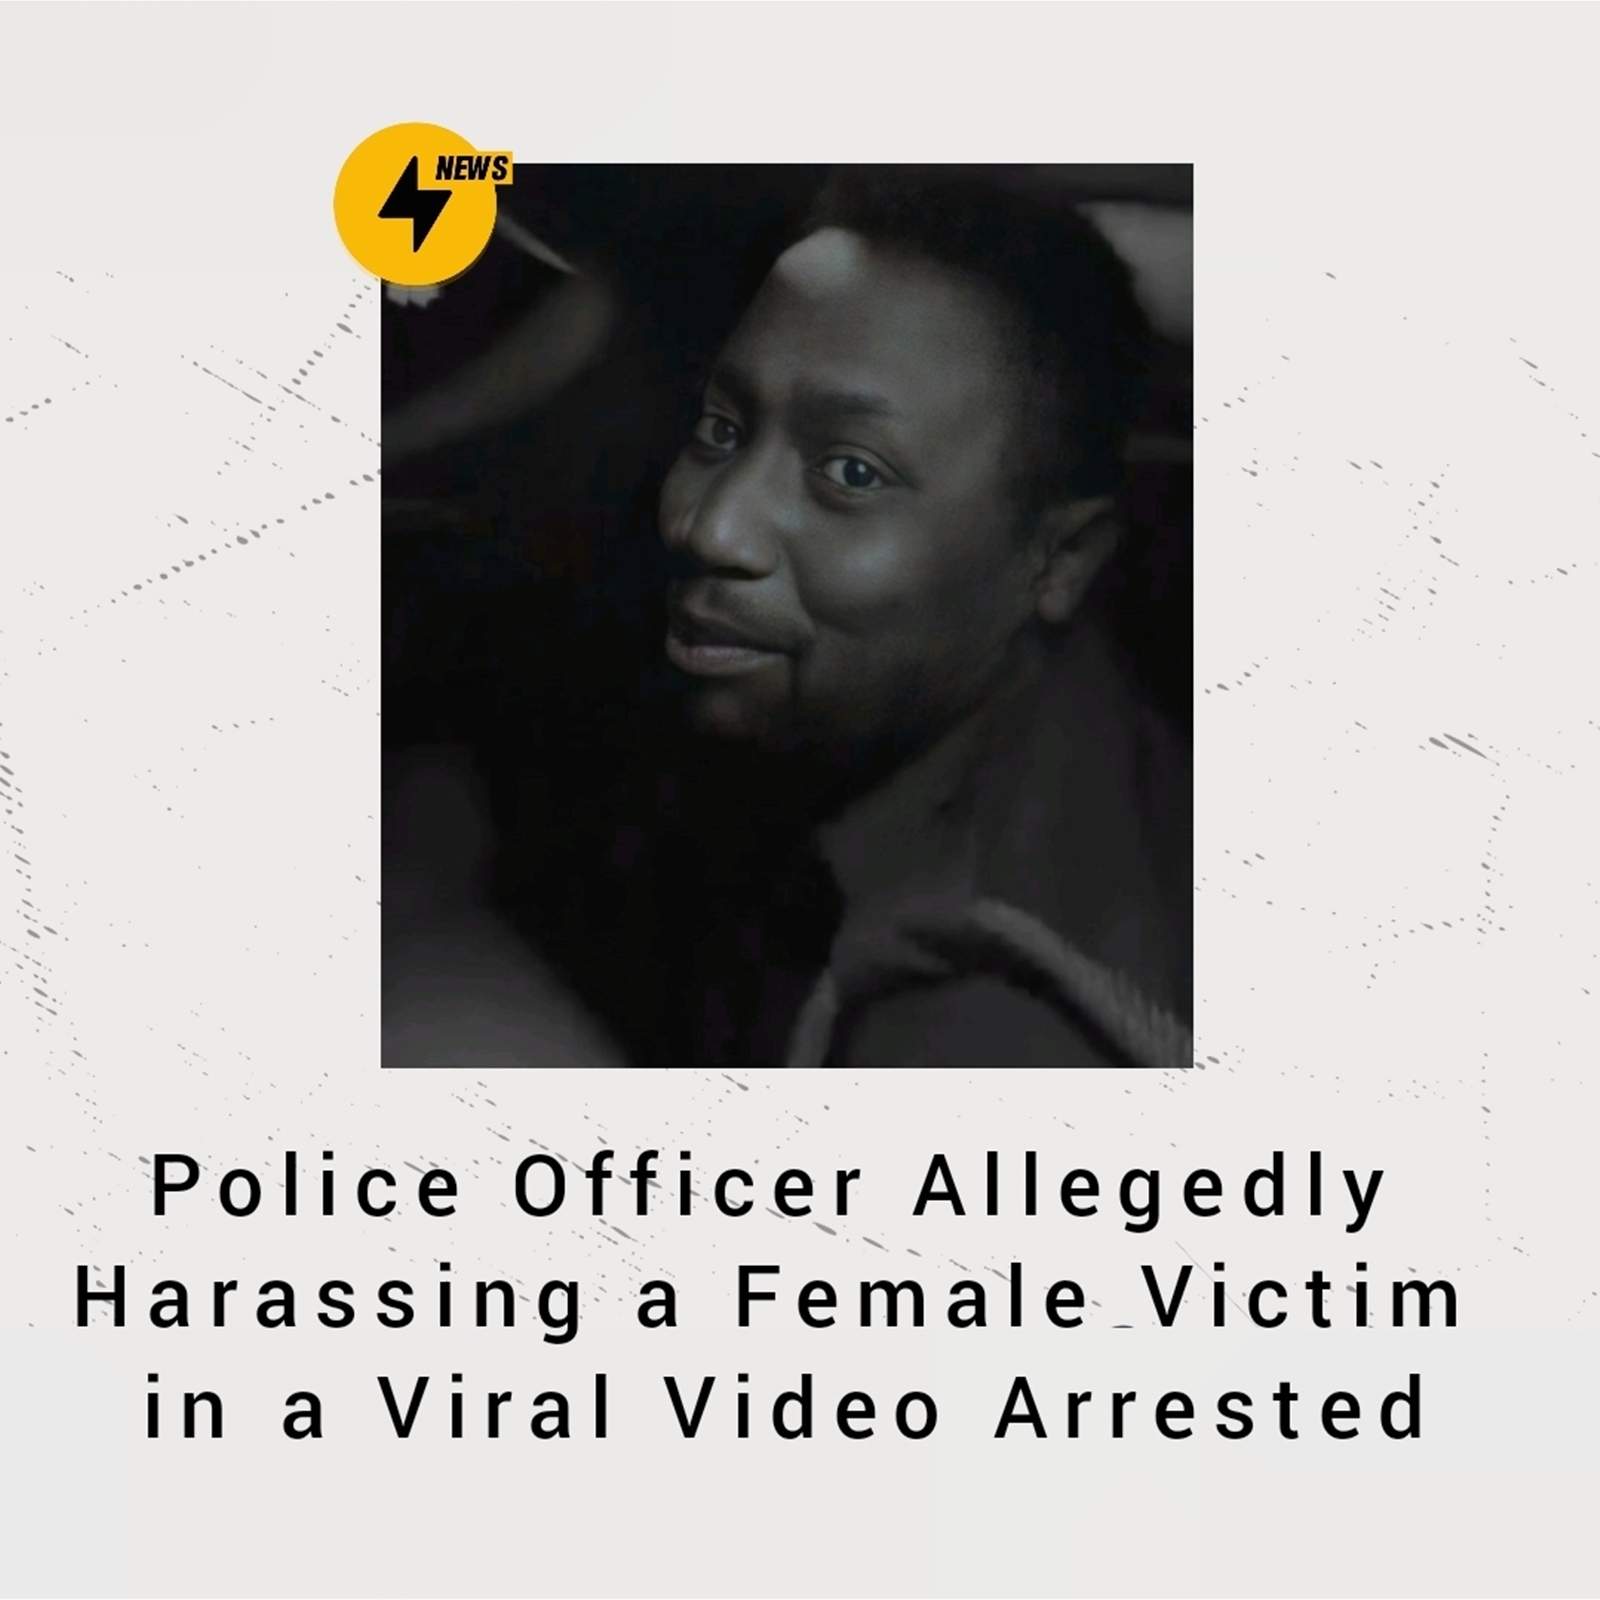 Police Officer Sexually Harassing a Female Victim in a Viral Video Arrested